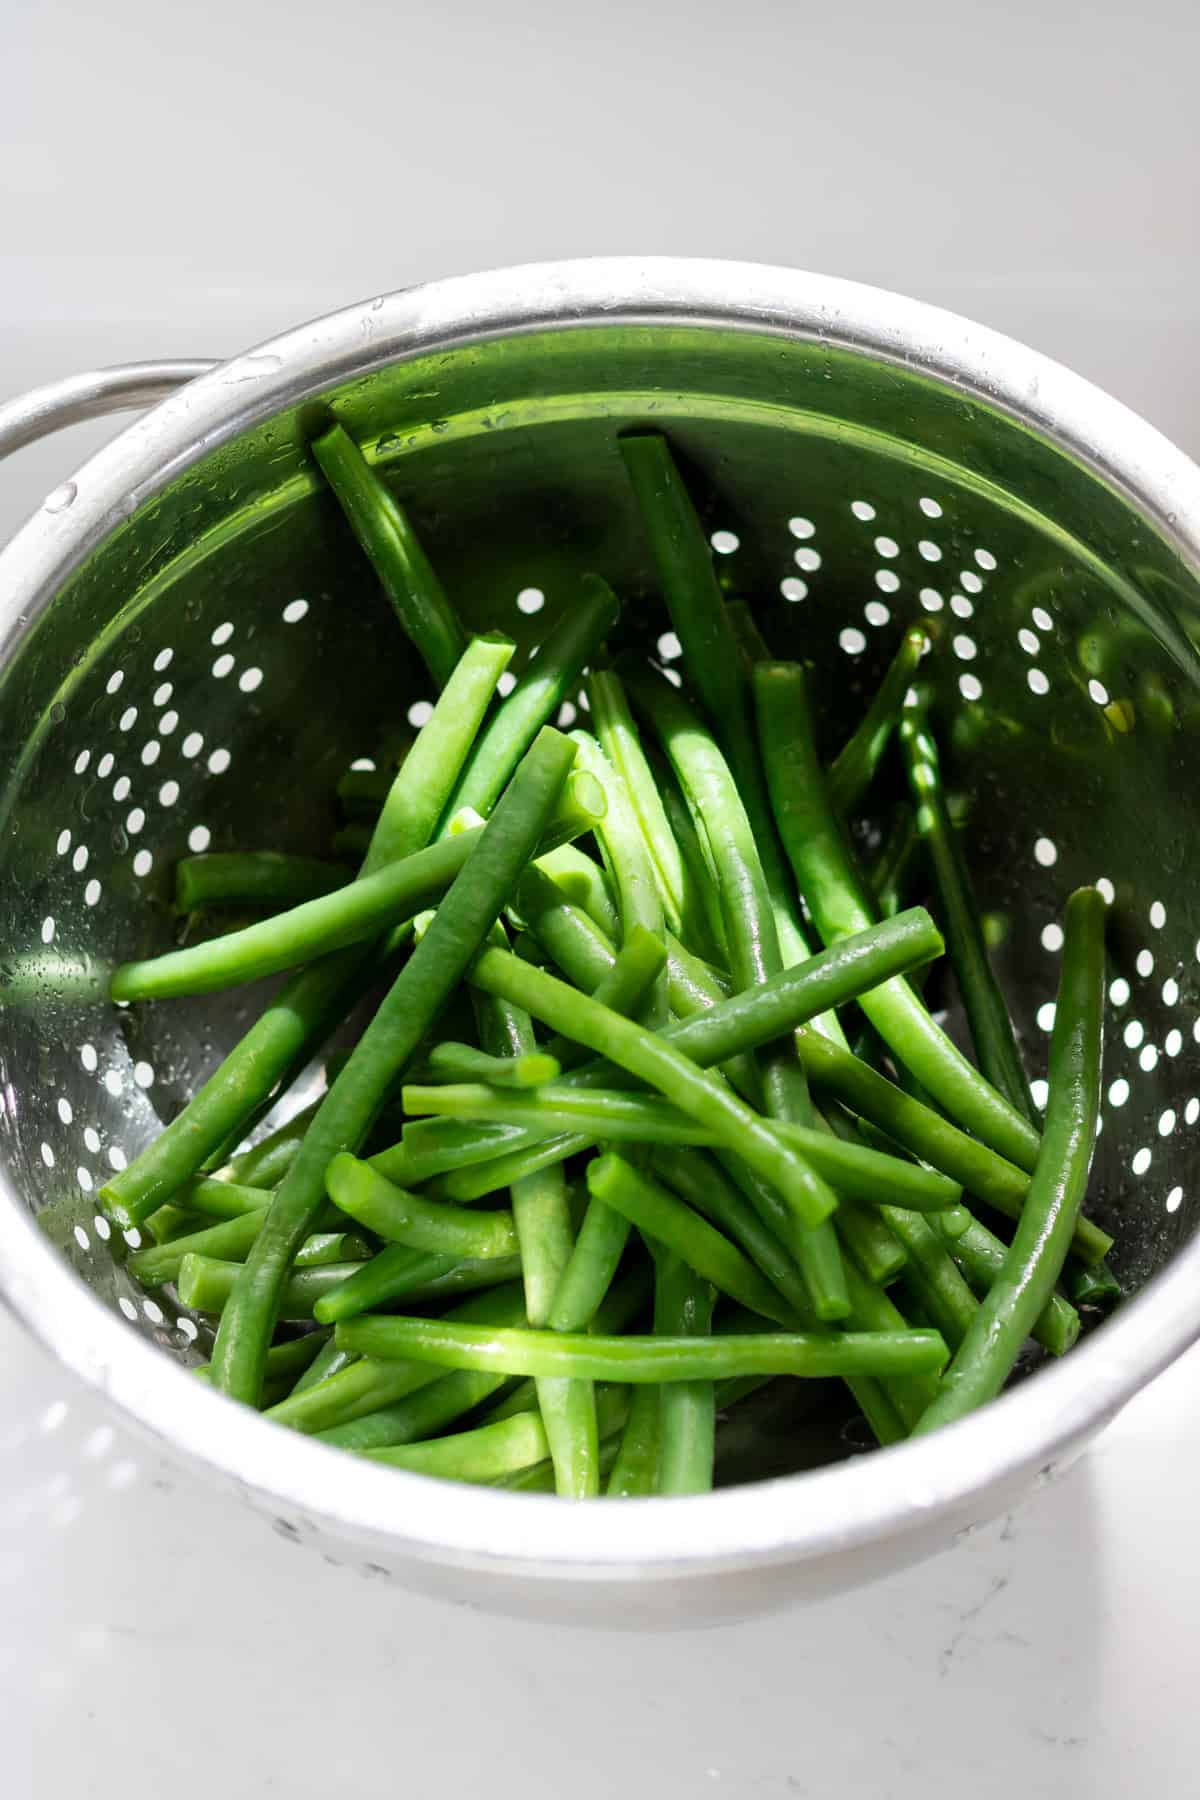 Drained cold blanched green beans in a colander.